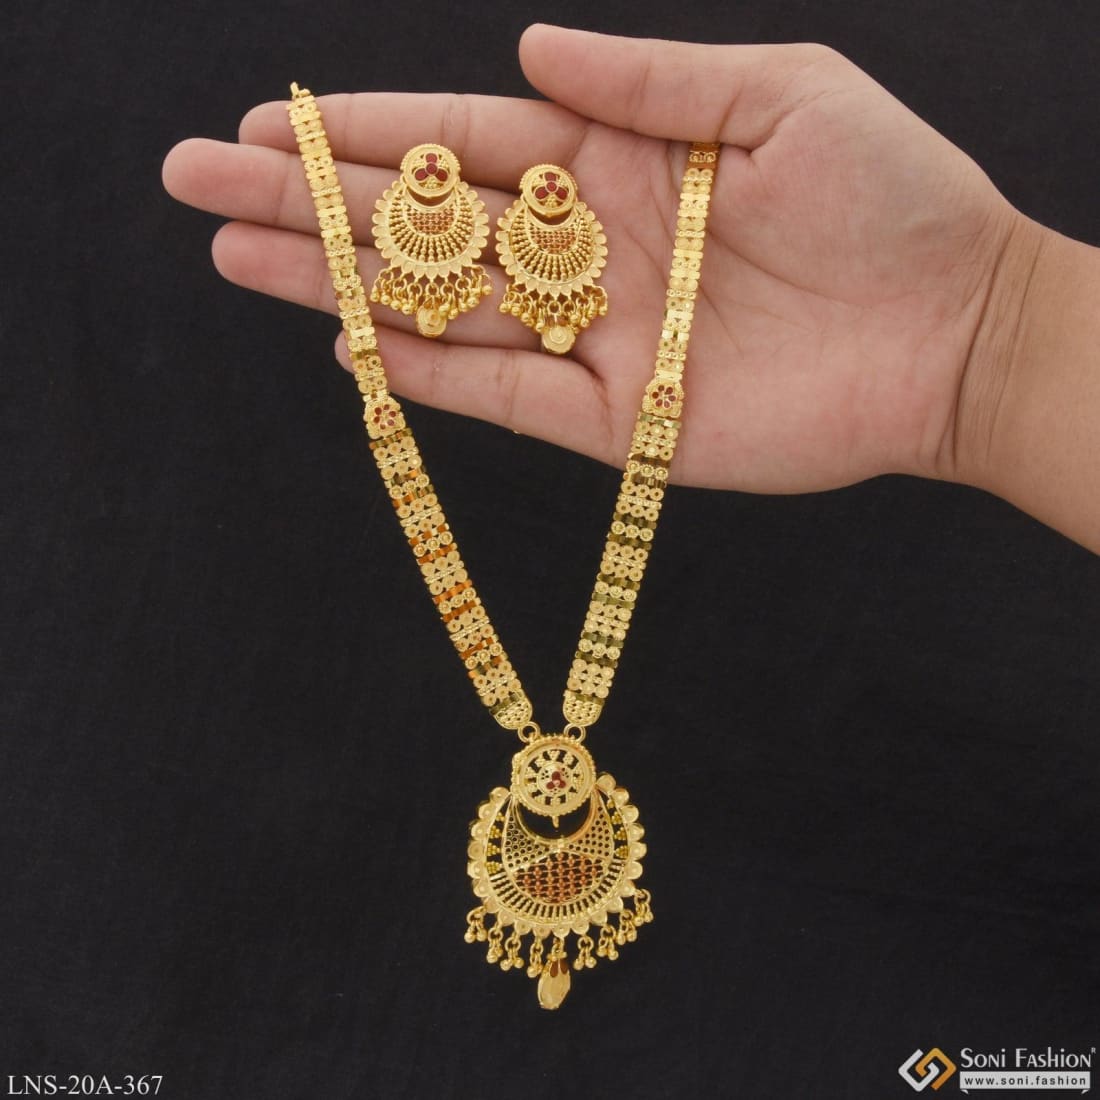 Fancy Gold Necklace Design (22ct & 23ct) Images • Mohit Soni Verama  (@327414771) on ShareChat